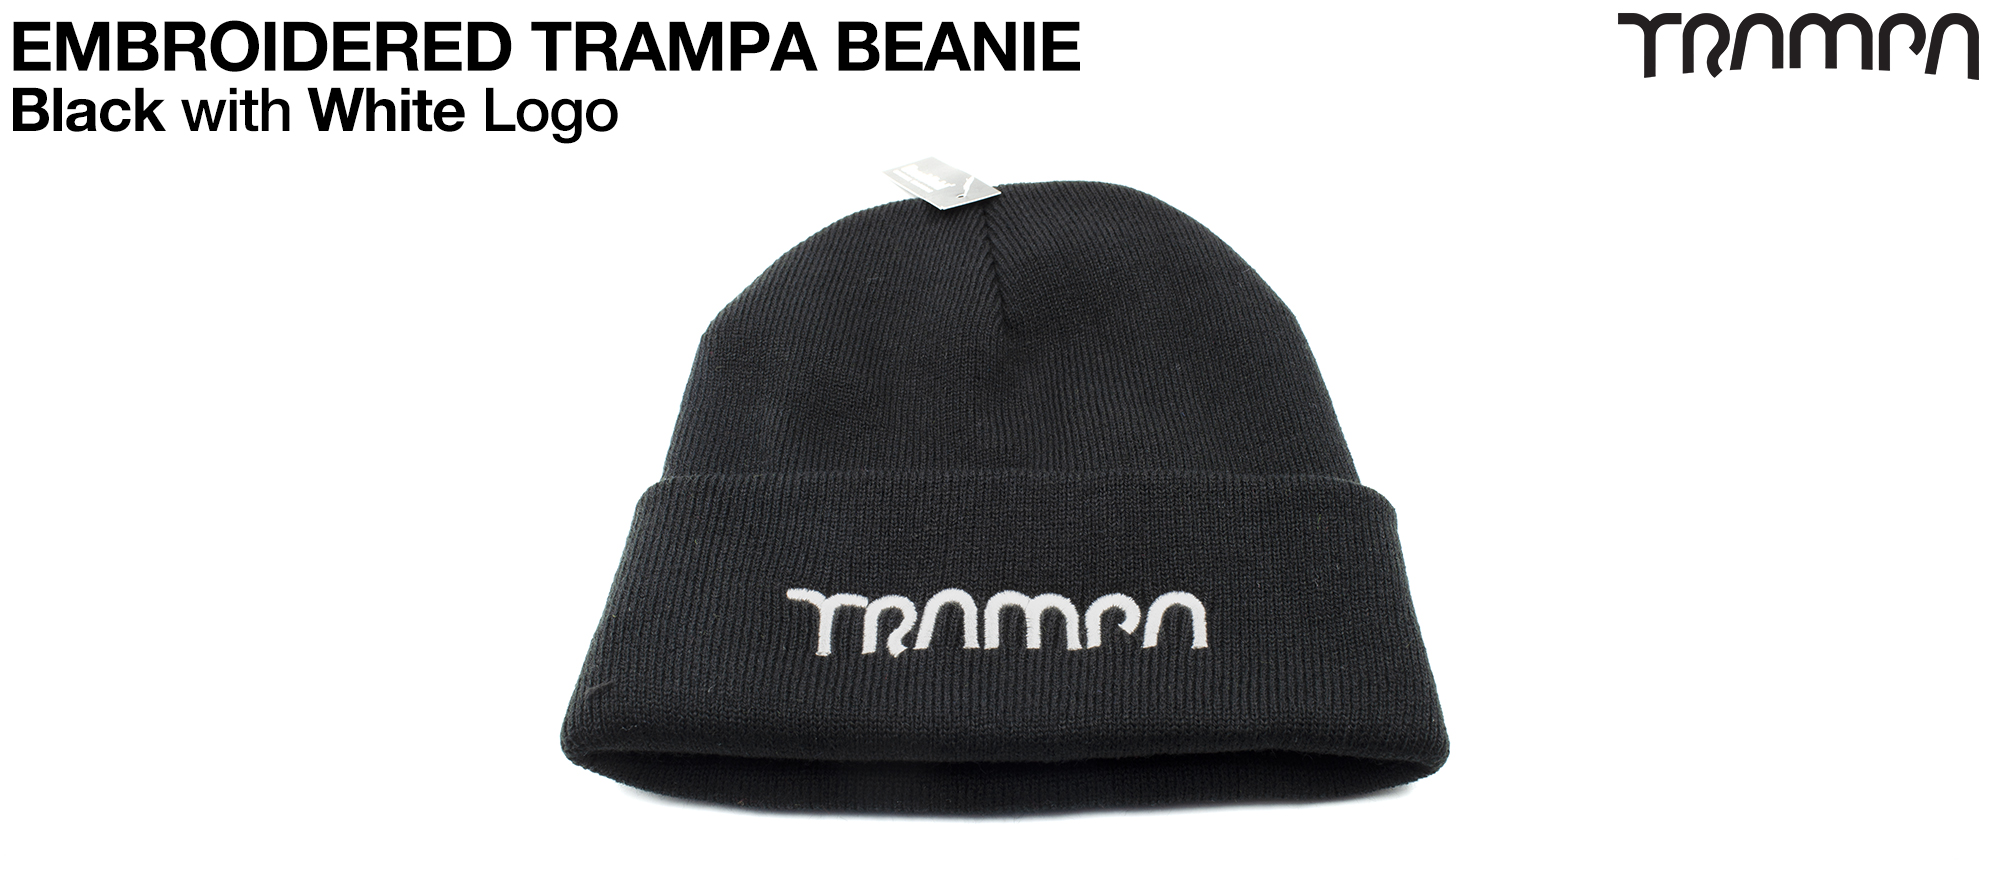 BLACK Woolie hat with WHITE TRAMPA logo - Double thick turn over for extra warmth